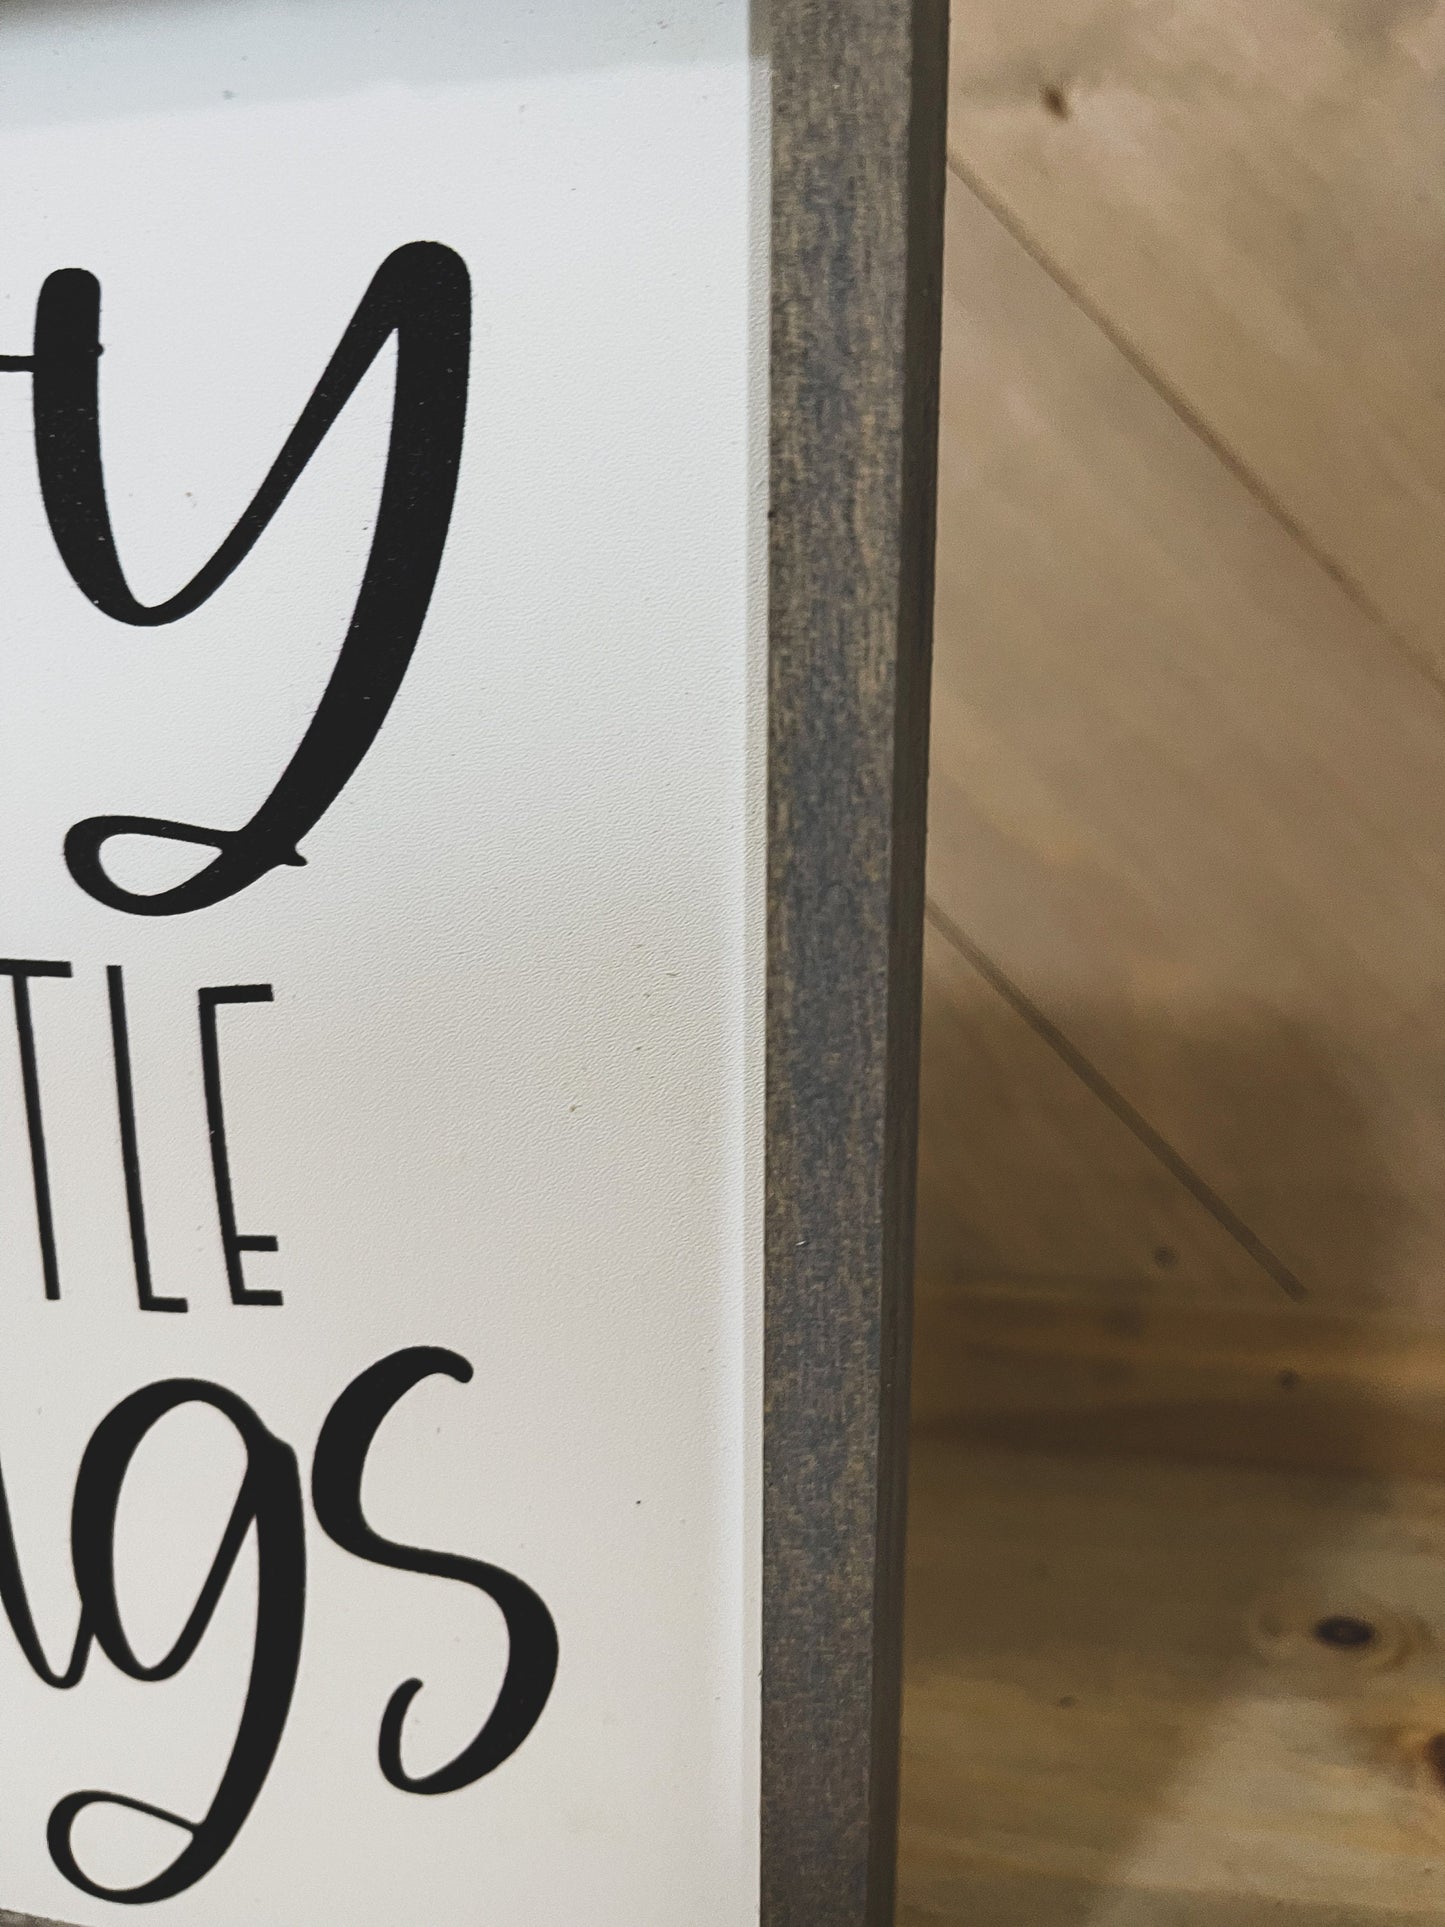 Enjoy the little things Farmhouse wood sign